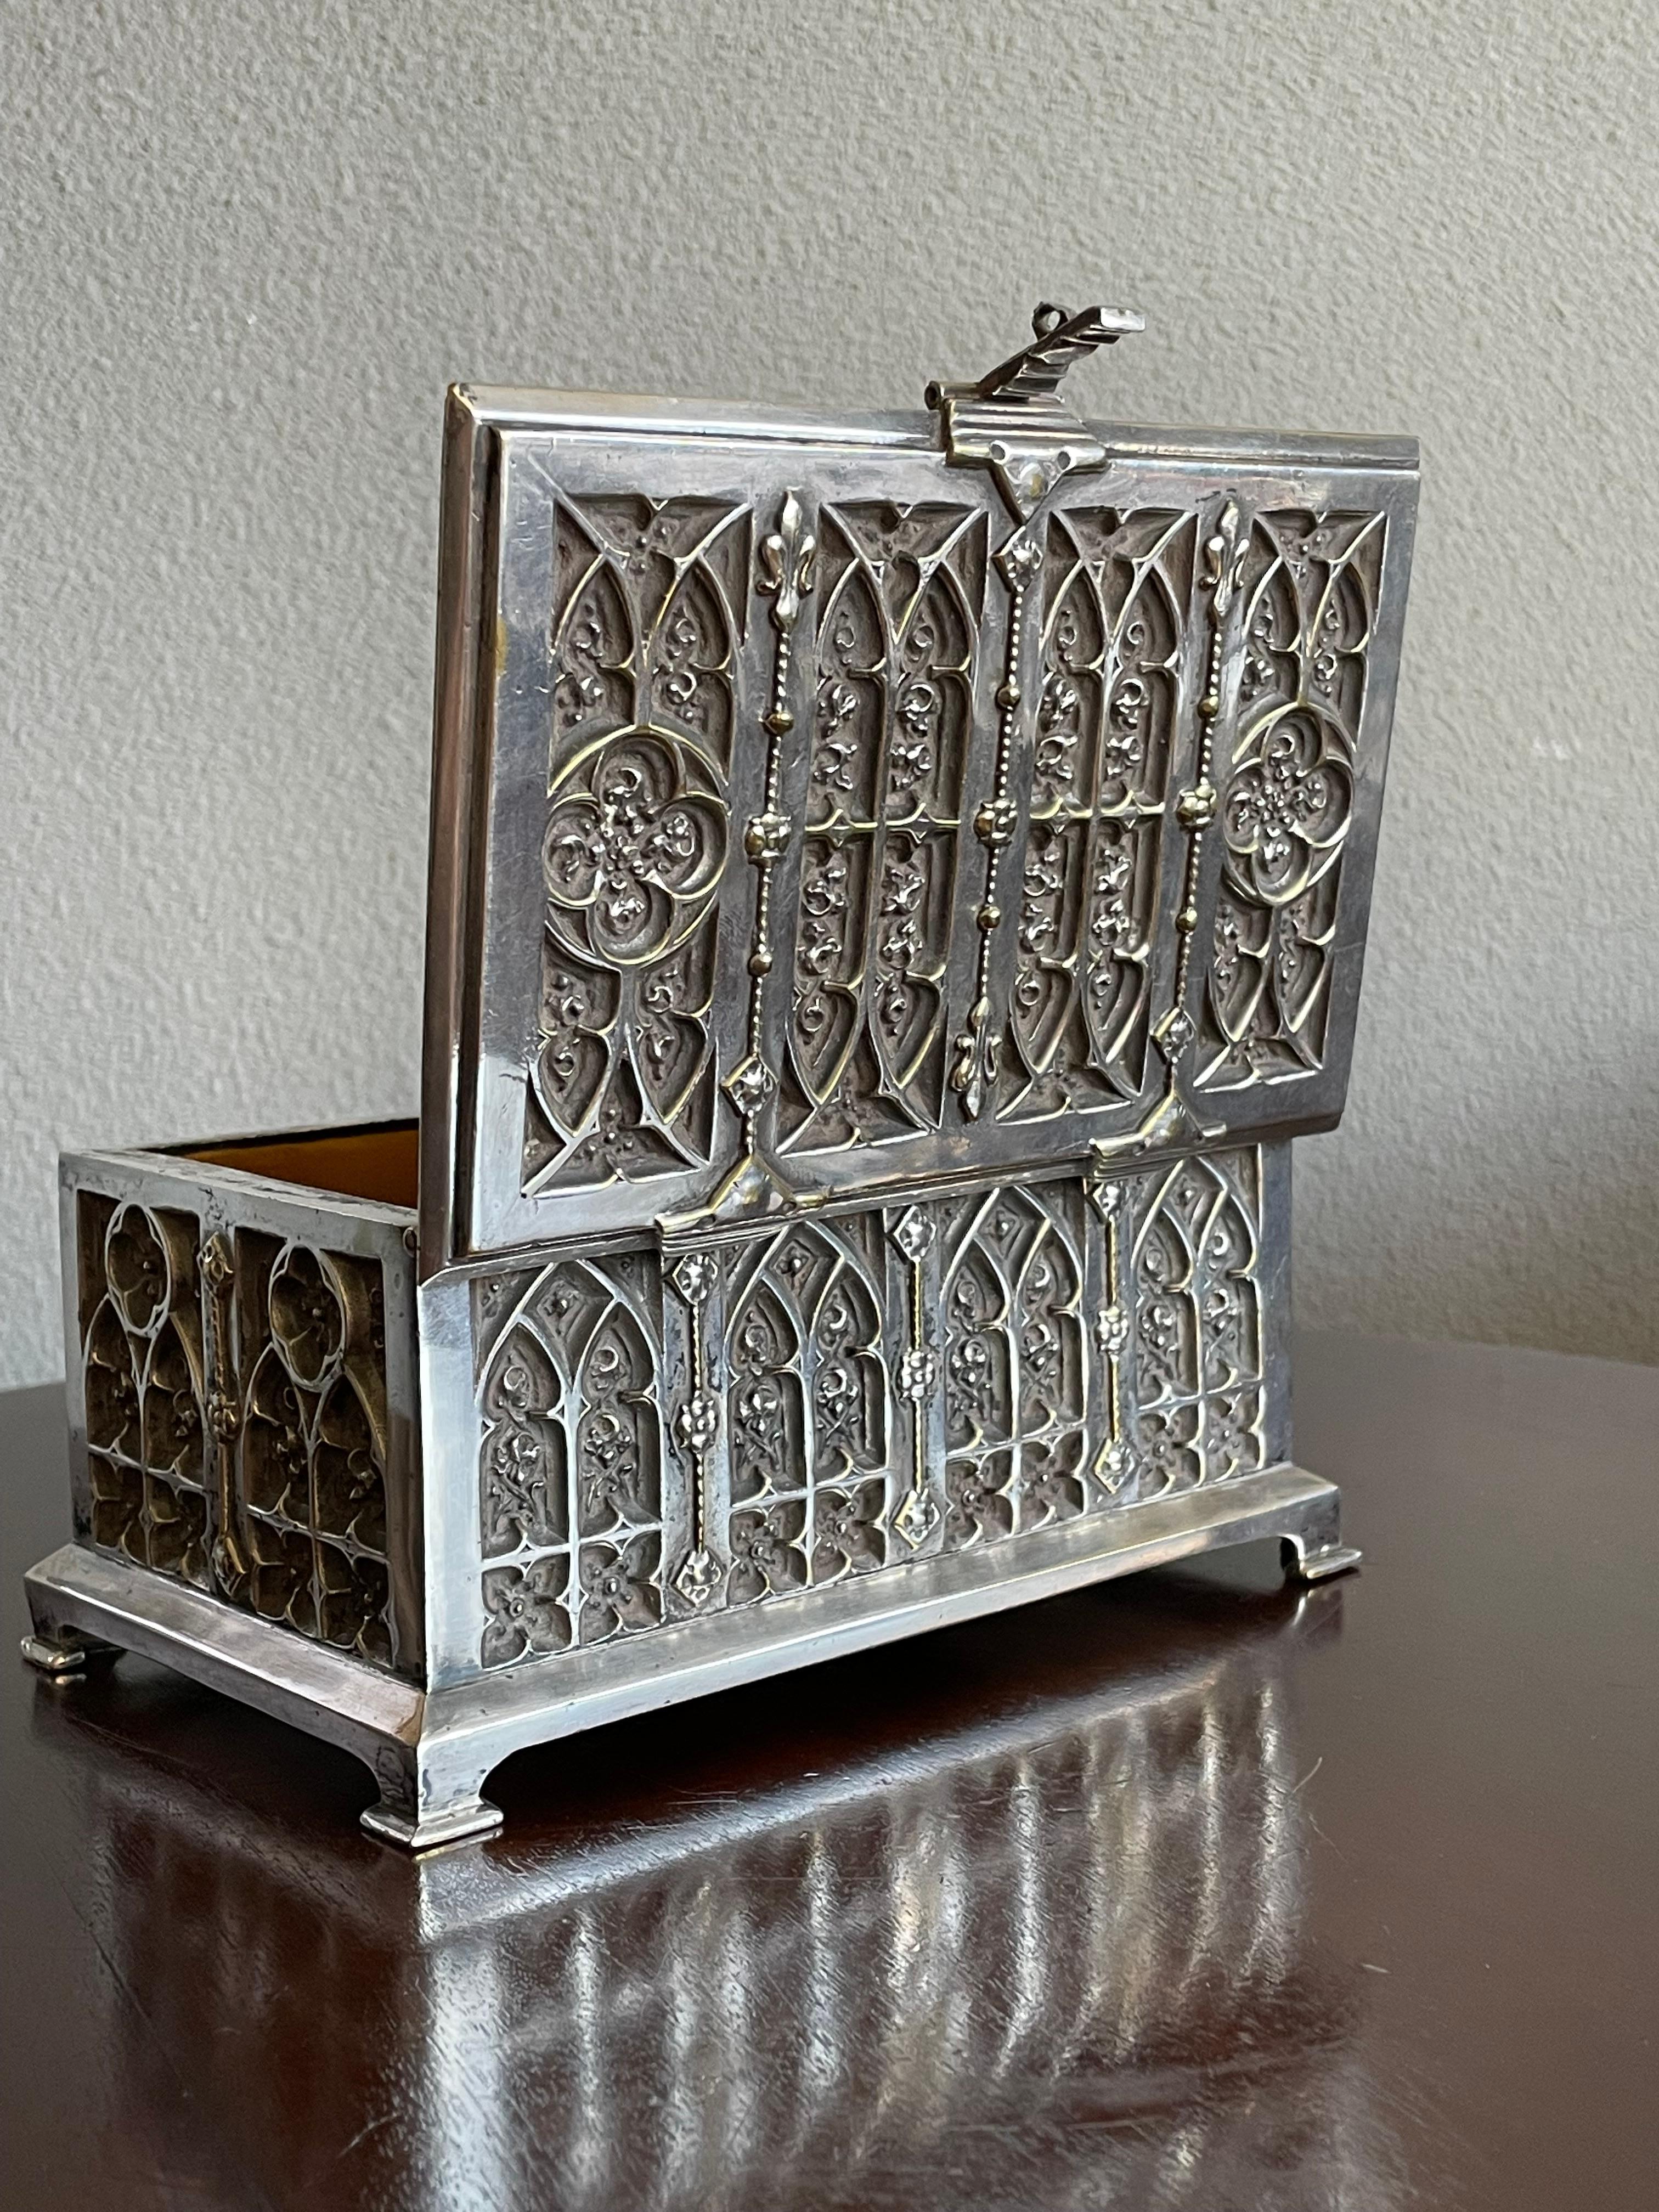 Antique, superb workmanship, silvered bronze Gothic box with quatrefoils in church window-like panels.

Over the years we have sold a number of rare and unique boxes, but never a Gothic Revival one looking like a medieval antiquity and with such